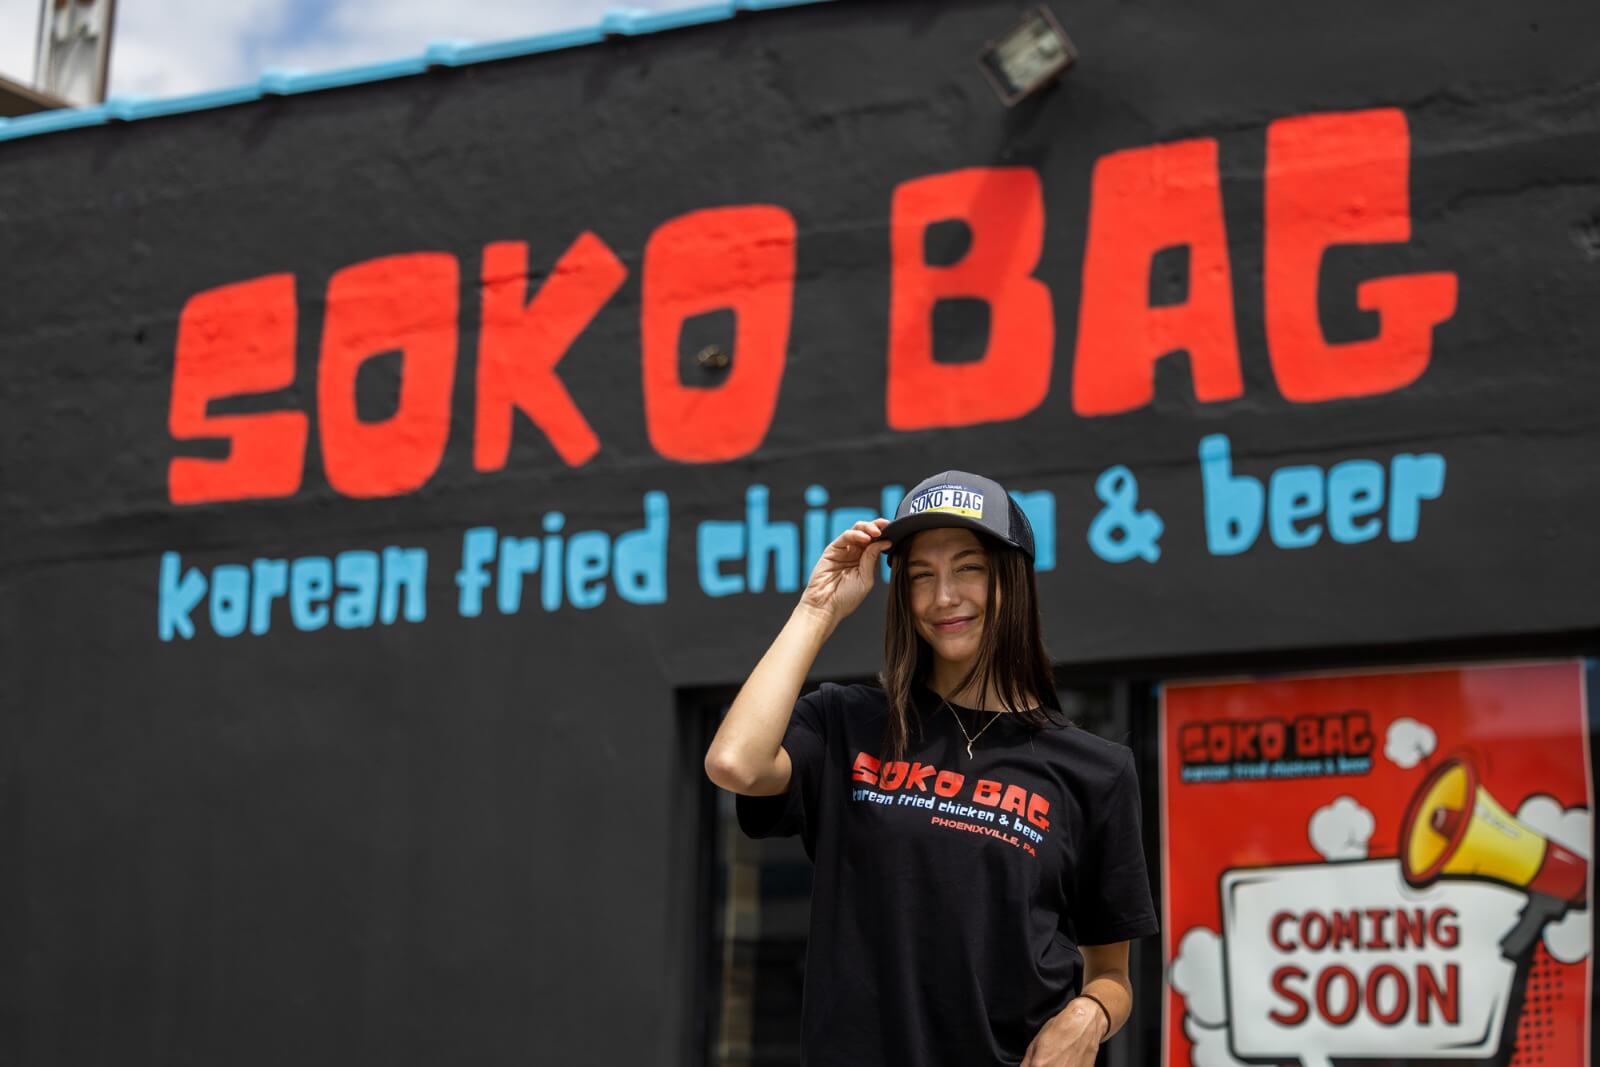 Soko Bag Restaurant with a girl smiling in soko bag clothes